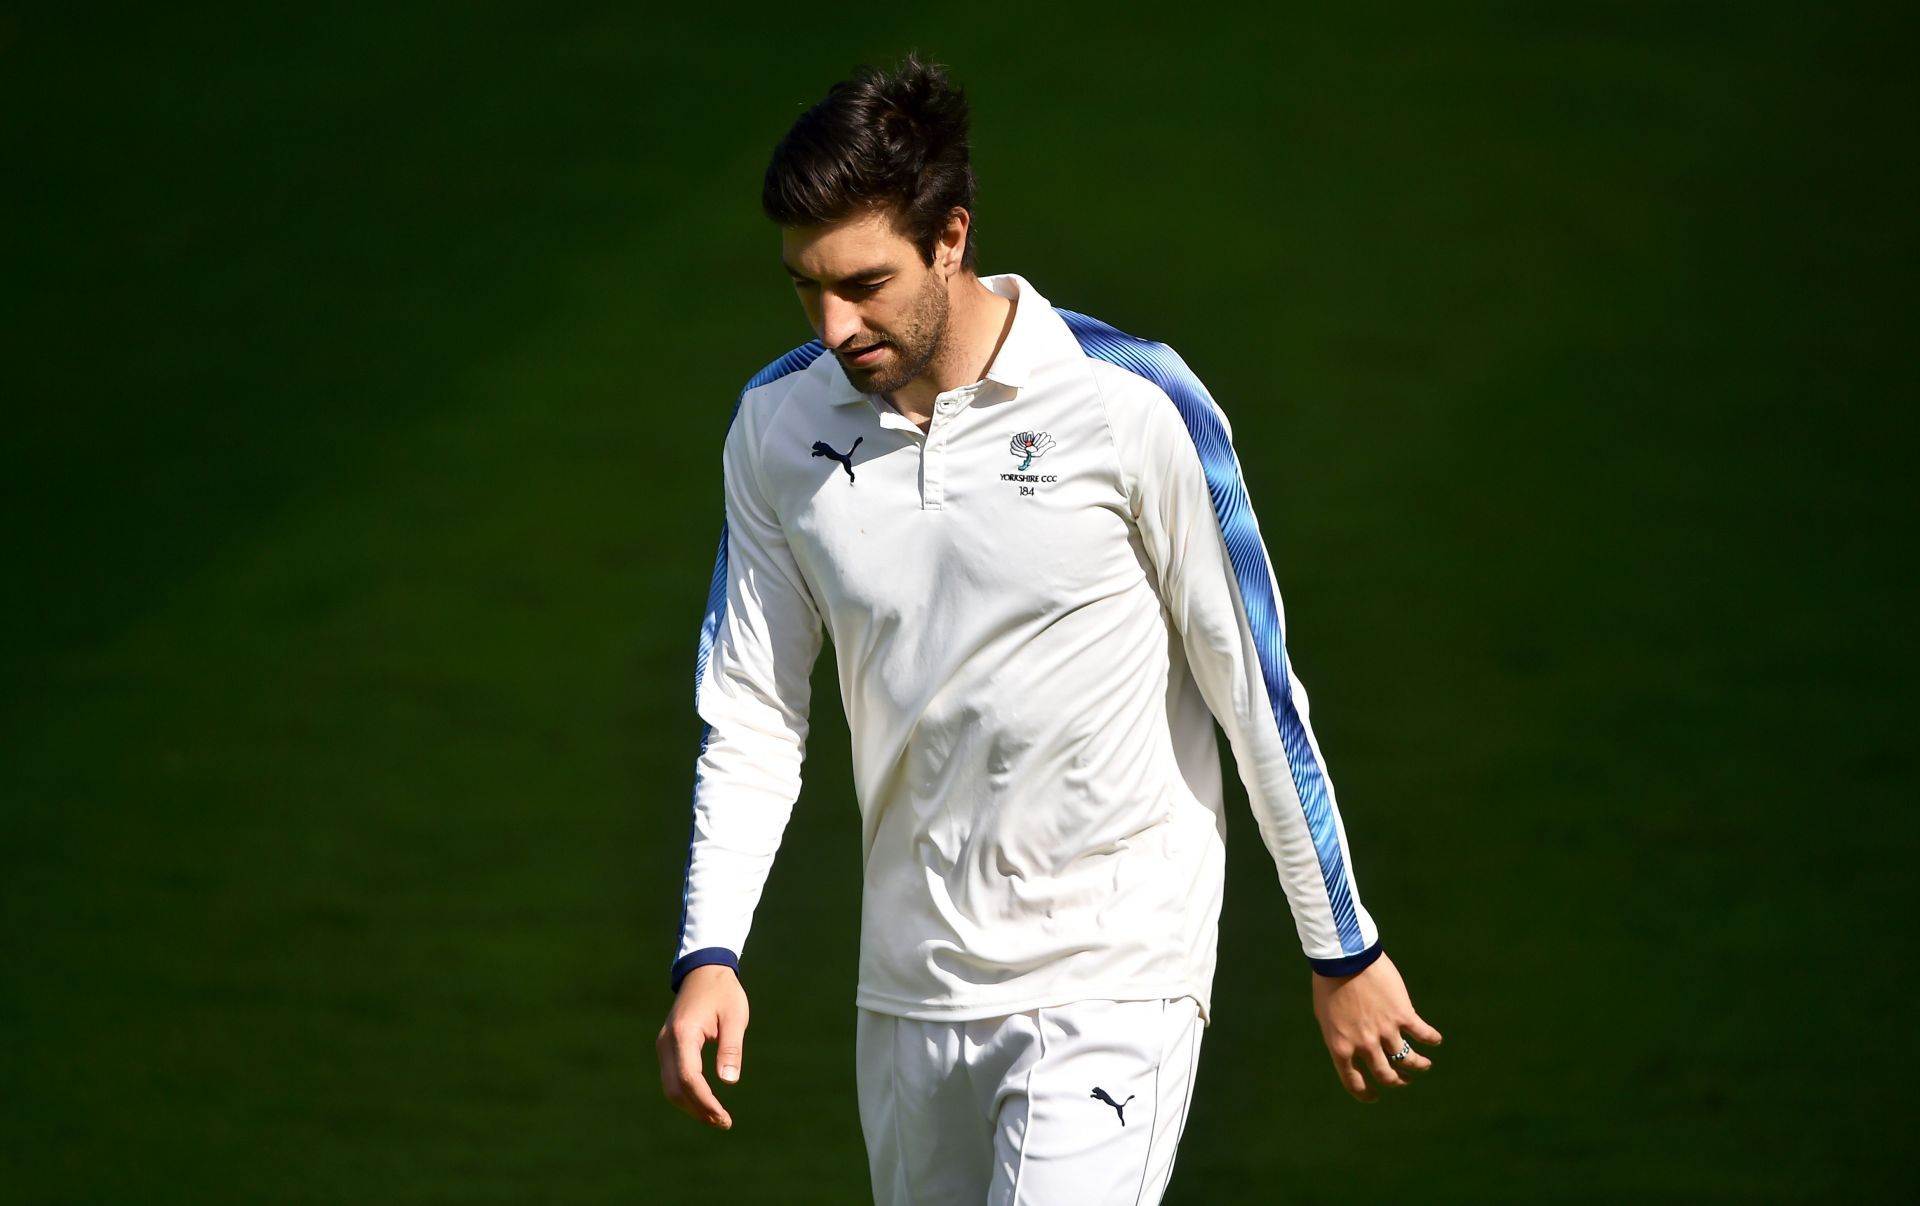 Duanne Olivier was not in the playing XI for the first Test against India